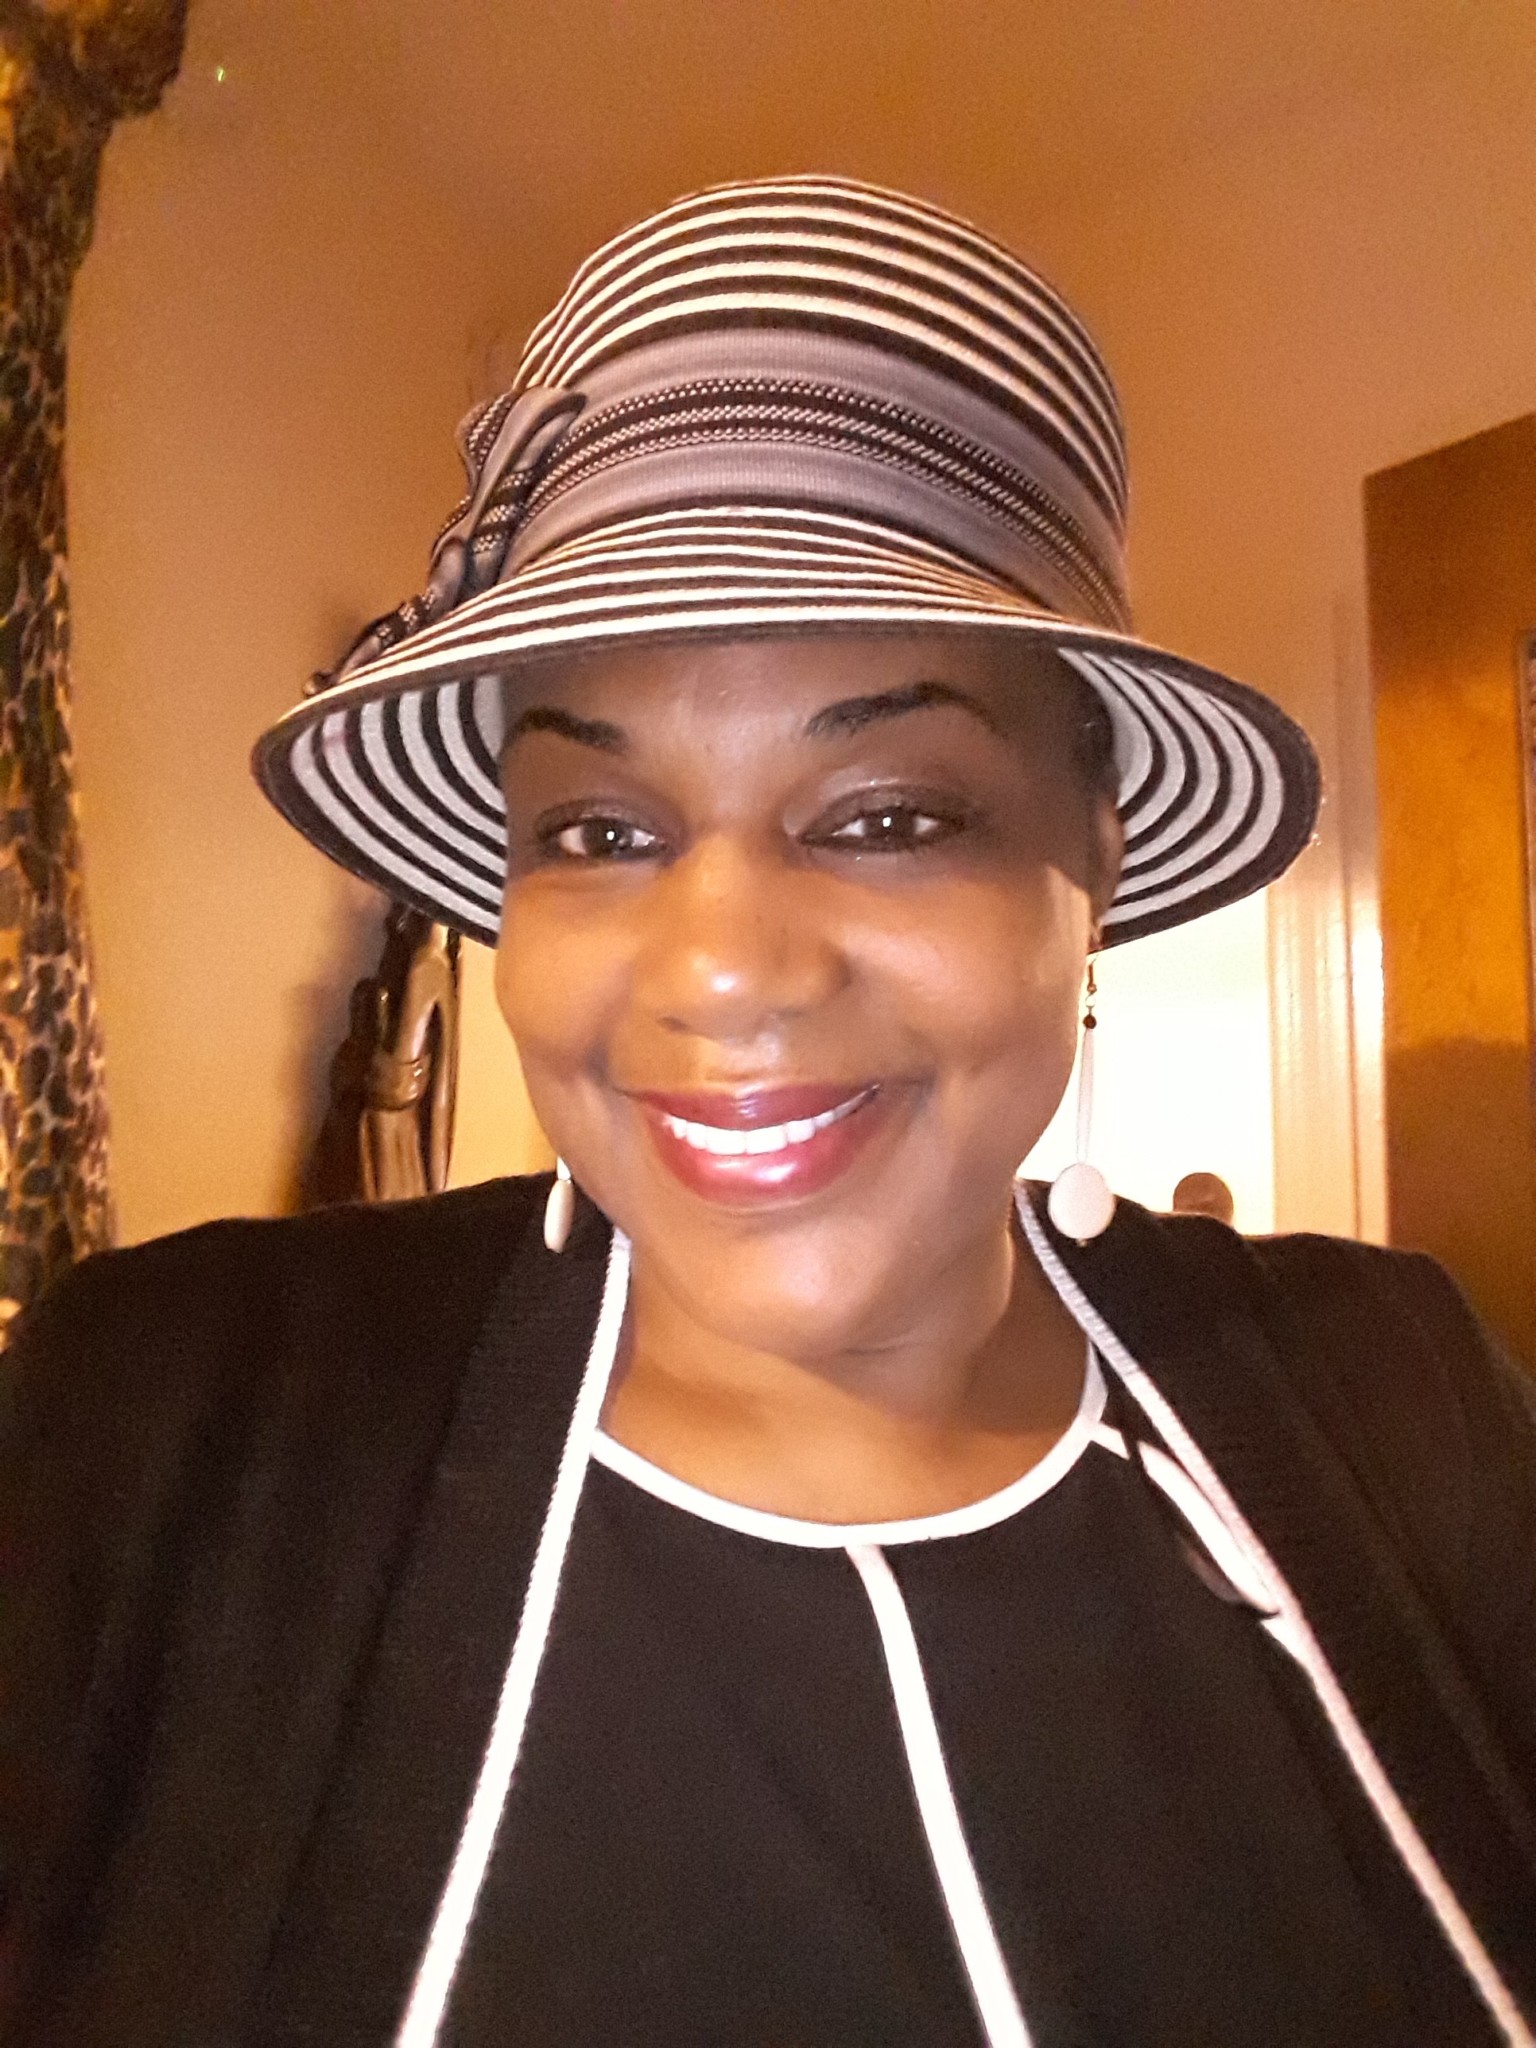 Ashro Woman of the Week MICHELLE B., wearing a black jacket dress with white trim and a summery hat.